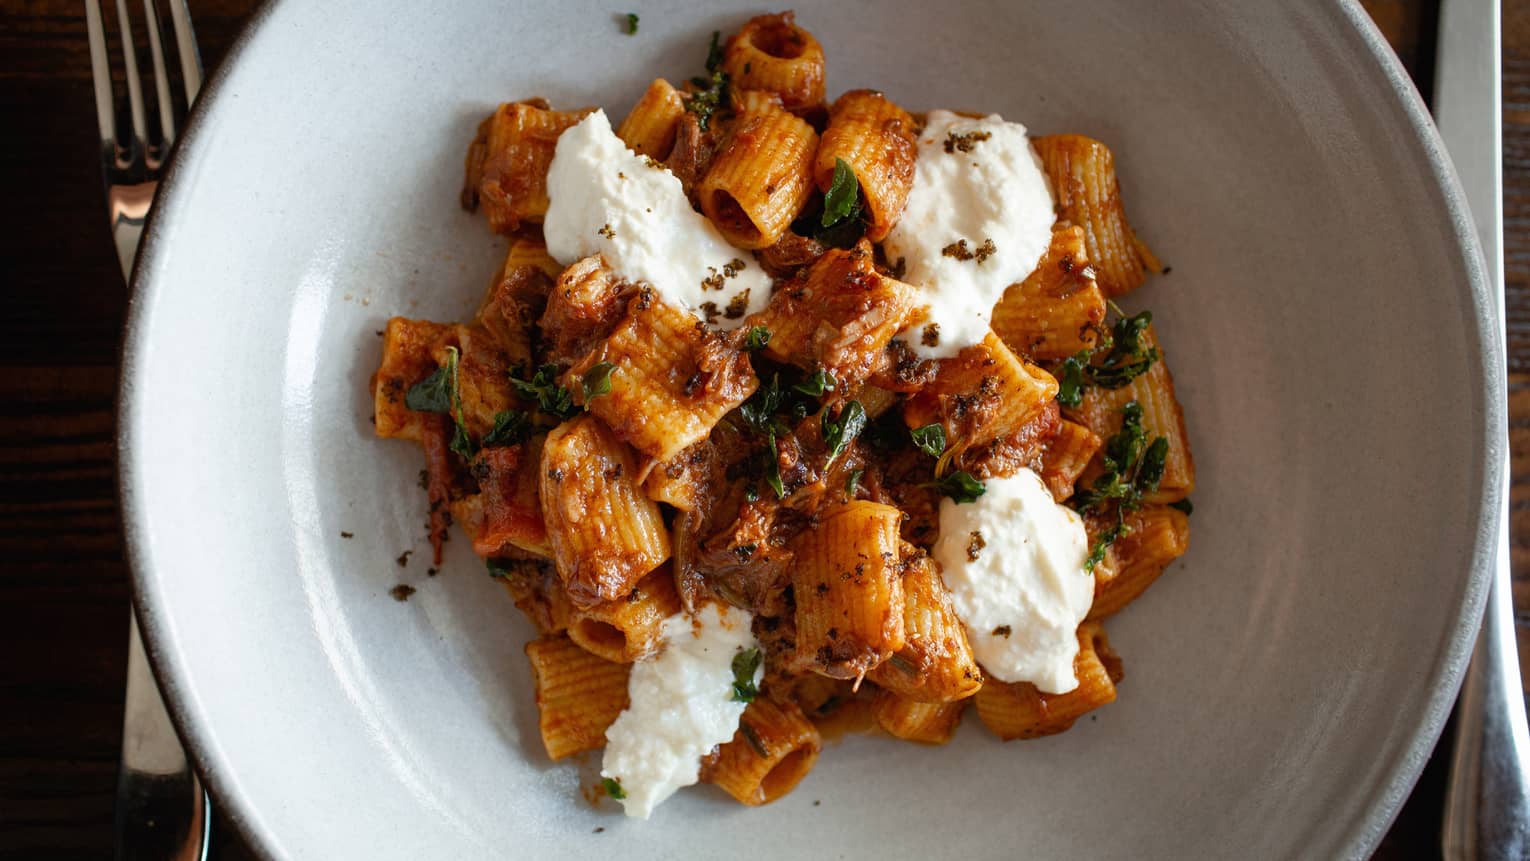 A pasta dish with creamy white cheese and a tomato sauce.